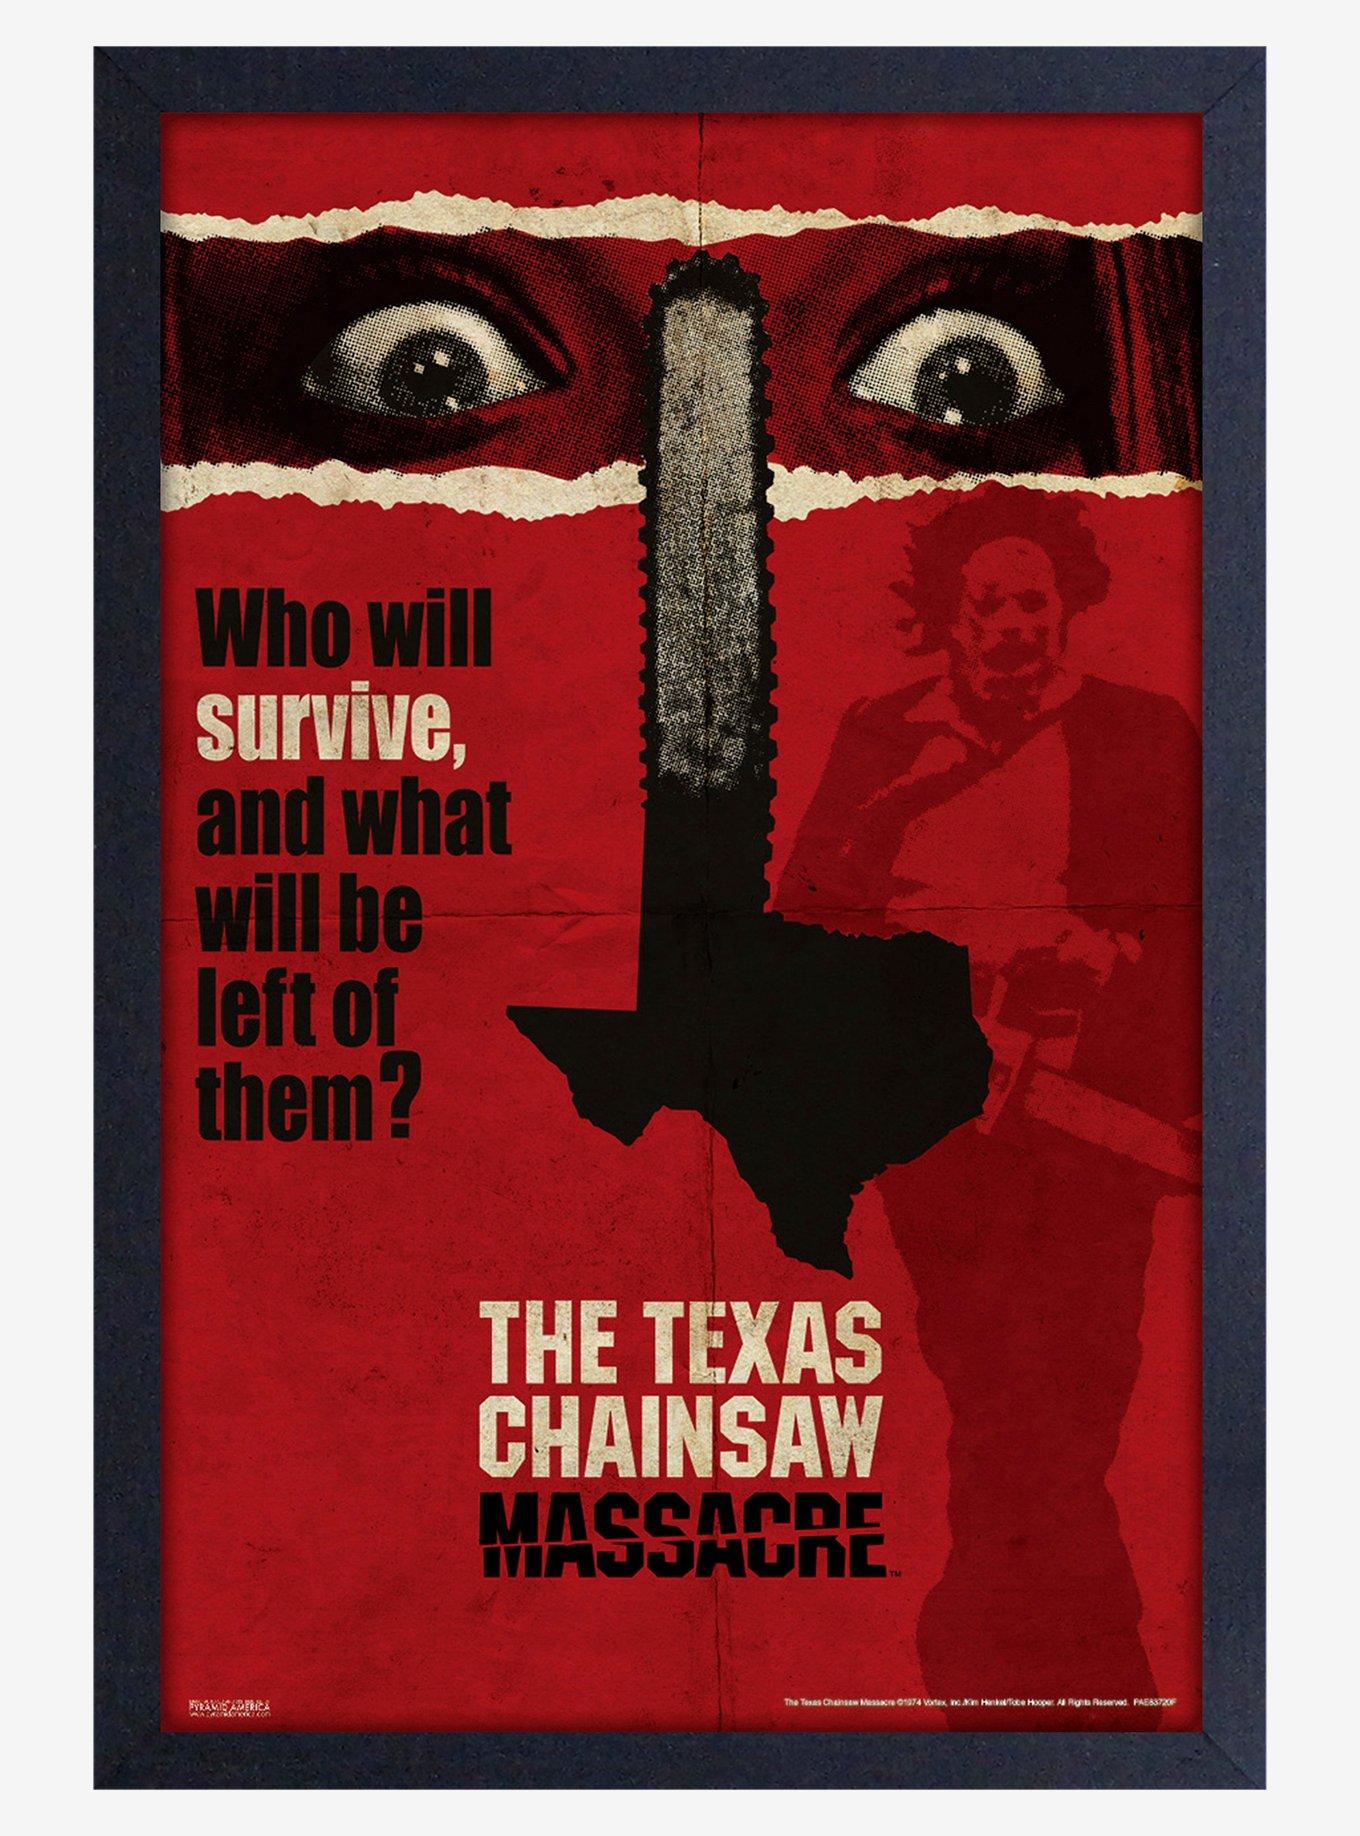 The Texas Chainsaw Massacre (1974) 40th Anniversary Limited Edition ...